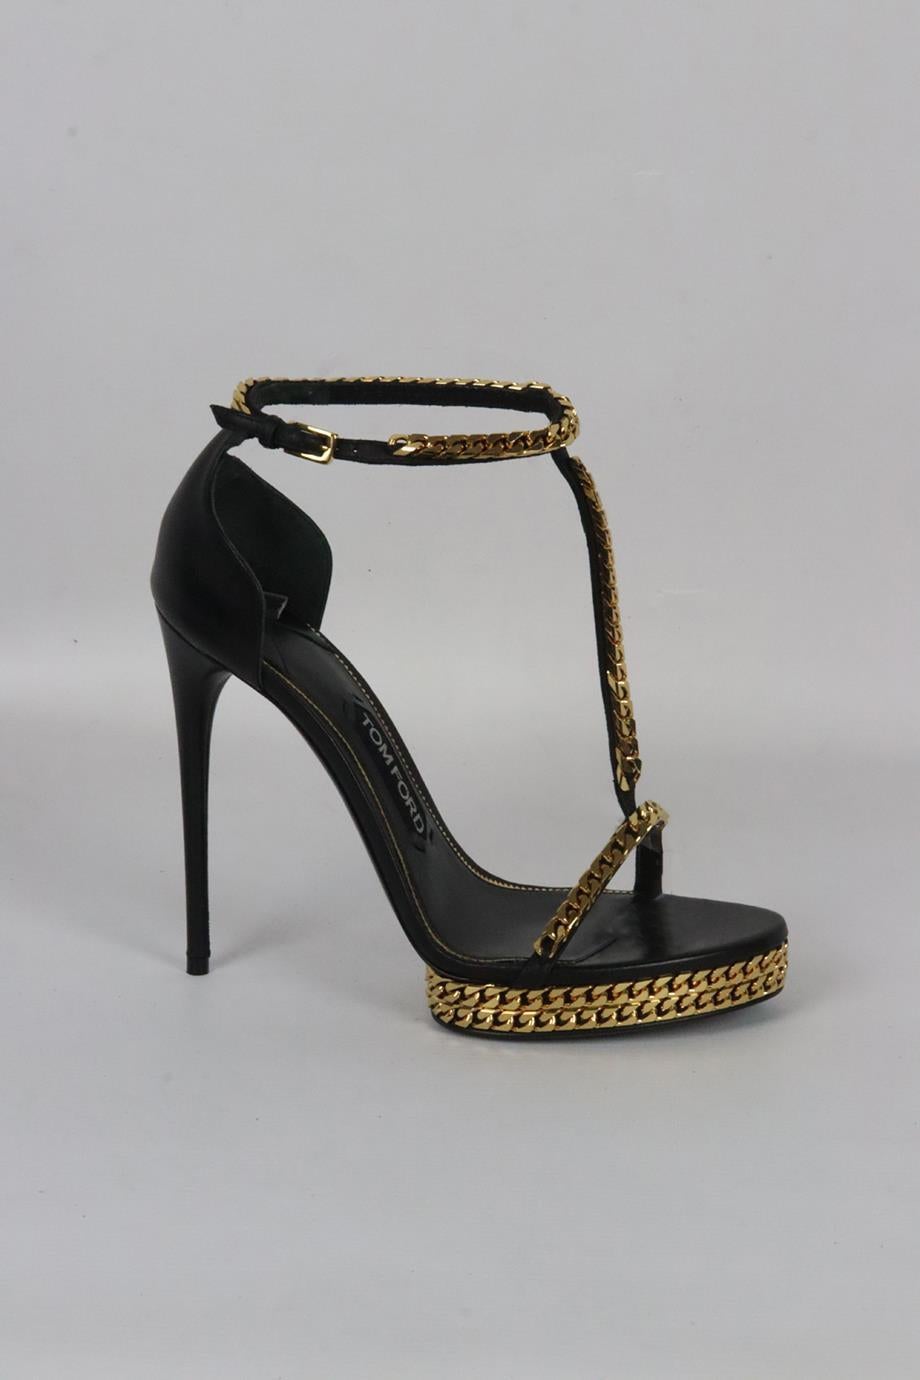 Tom Ford chain detailed leather platform sandals. Black and gold. Buckle fastening at side. Does not come with dustbag or box. Size: EU 38.5 (UK 5.5, US 8.5). Insole: 9.6 in. Heel Height: 4 in. Platform: 0.9 in. New without box